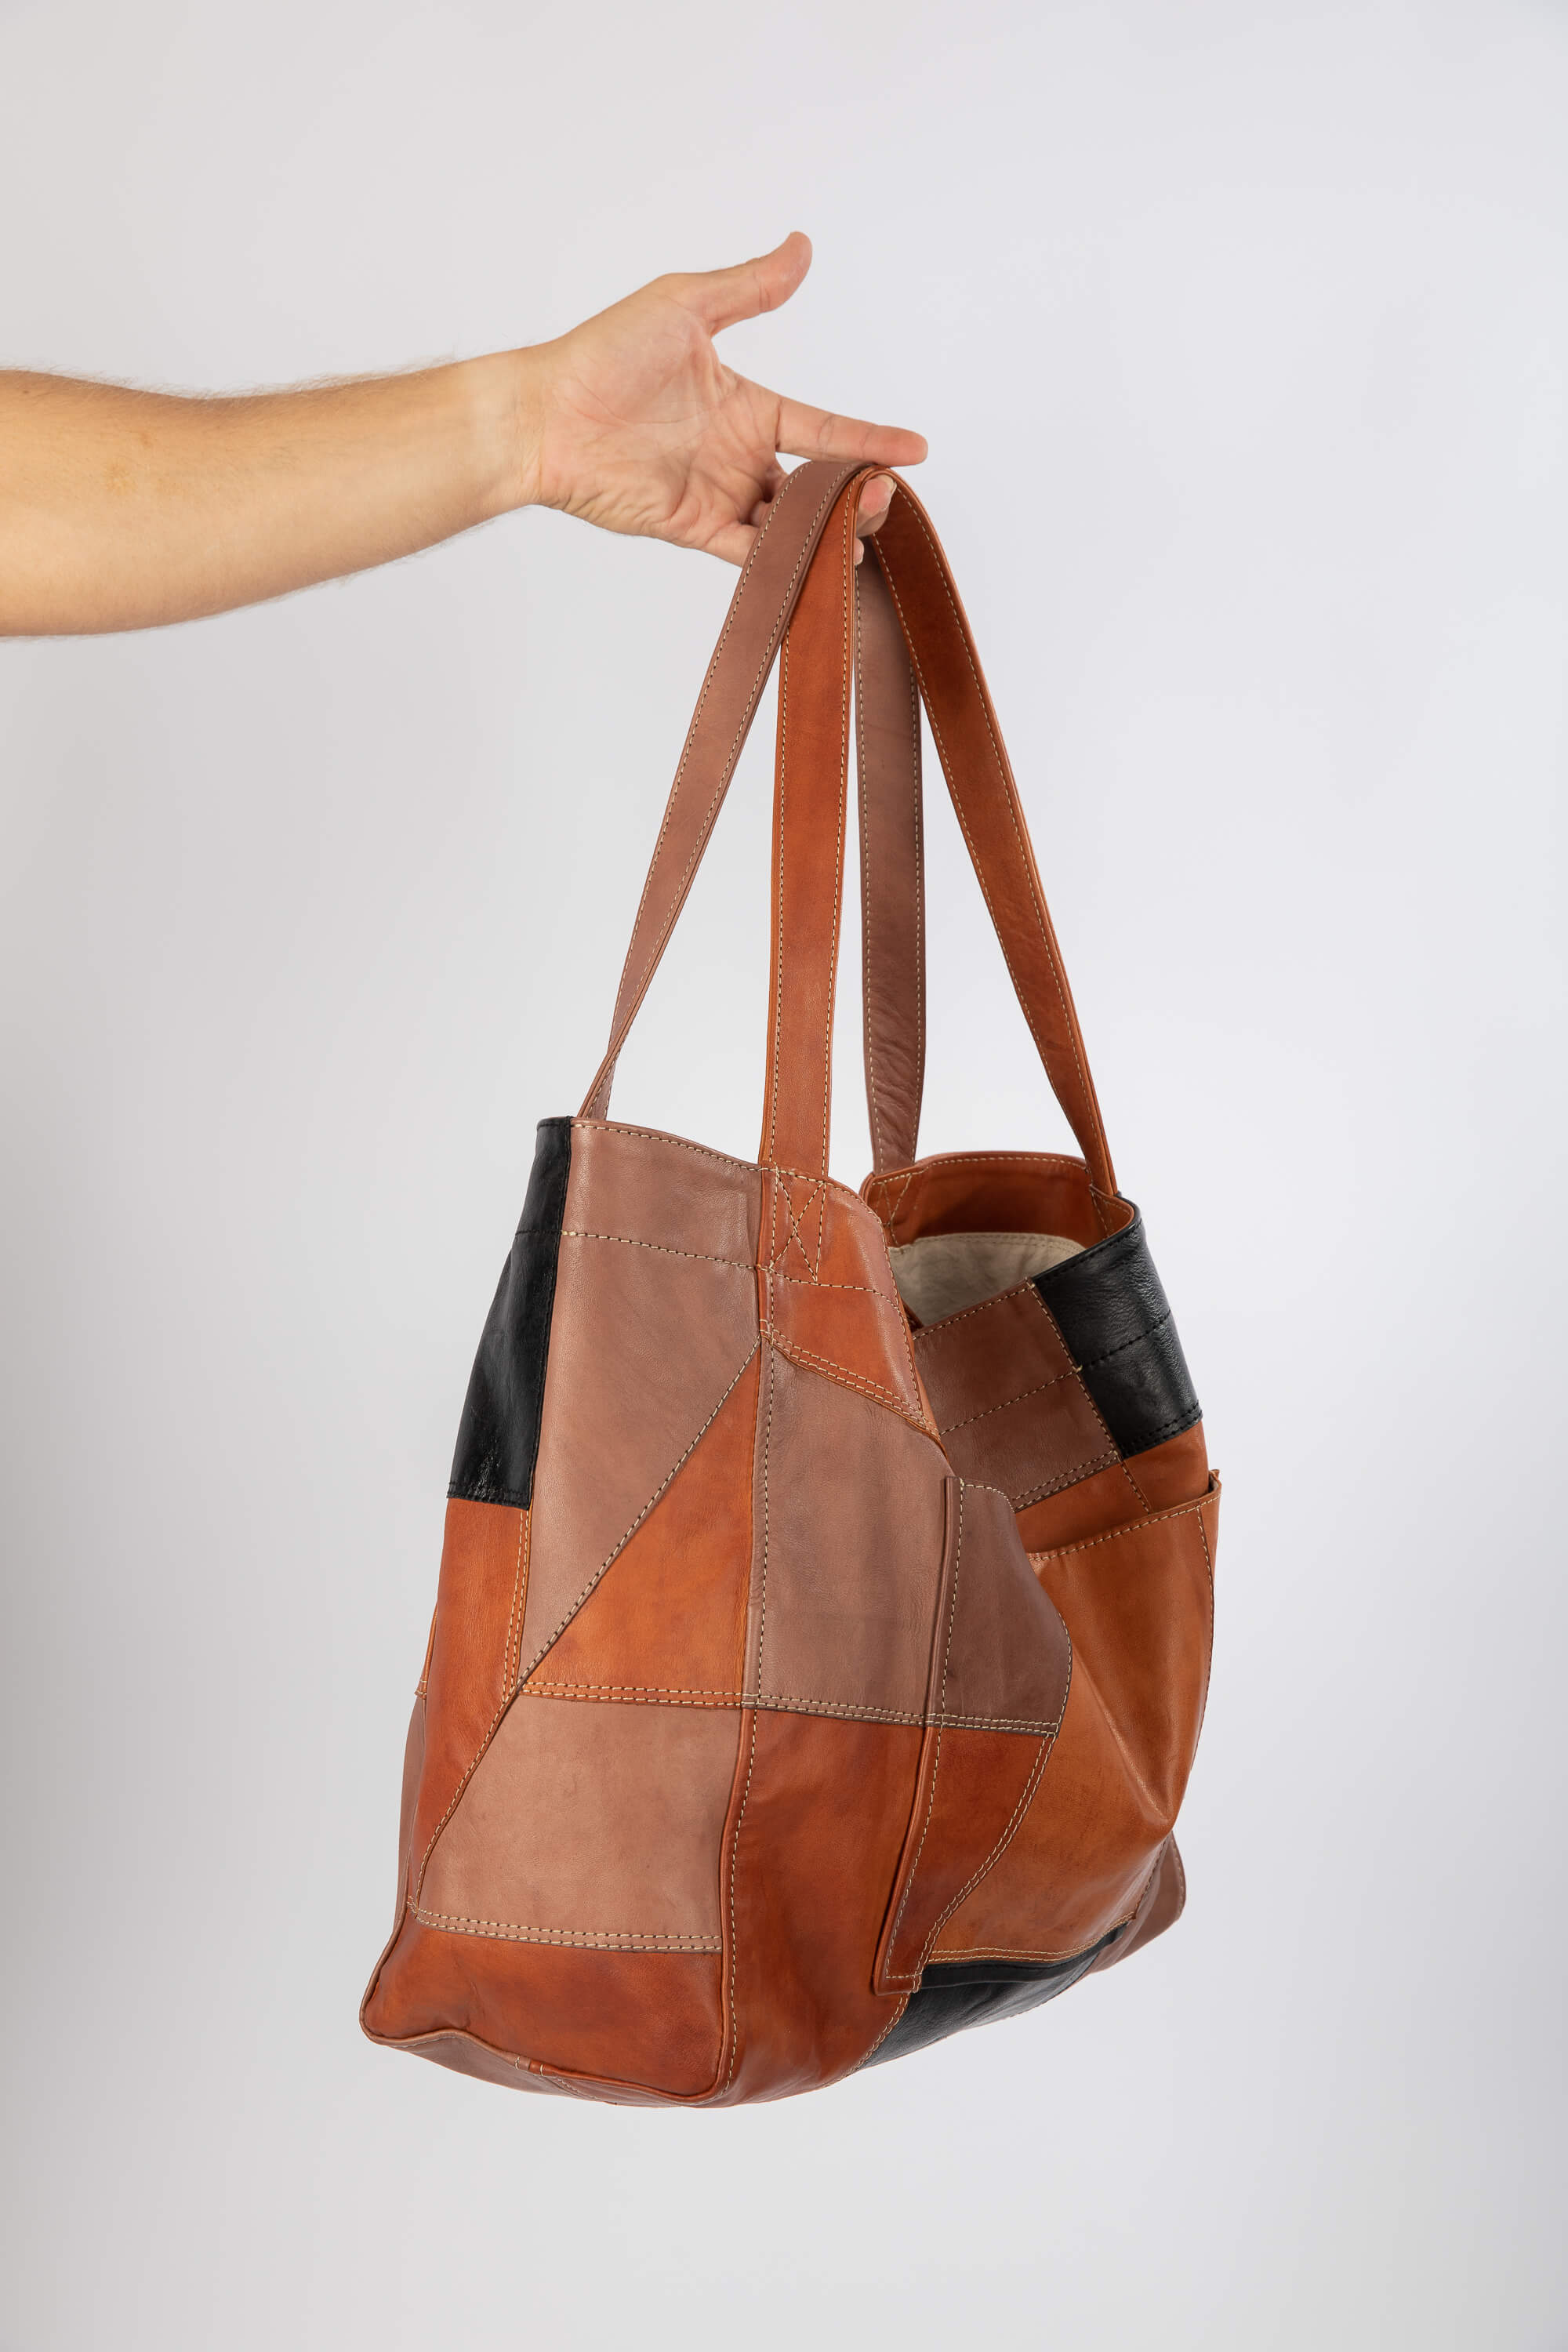 Up-cycled Patchwork Soft Leather Maxi Tote - Linden Is Enough